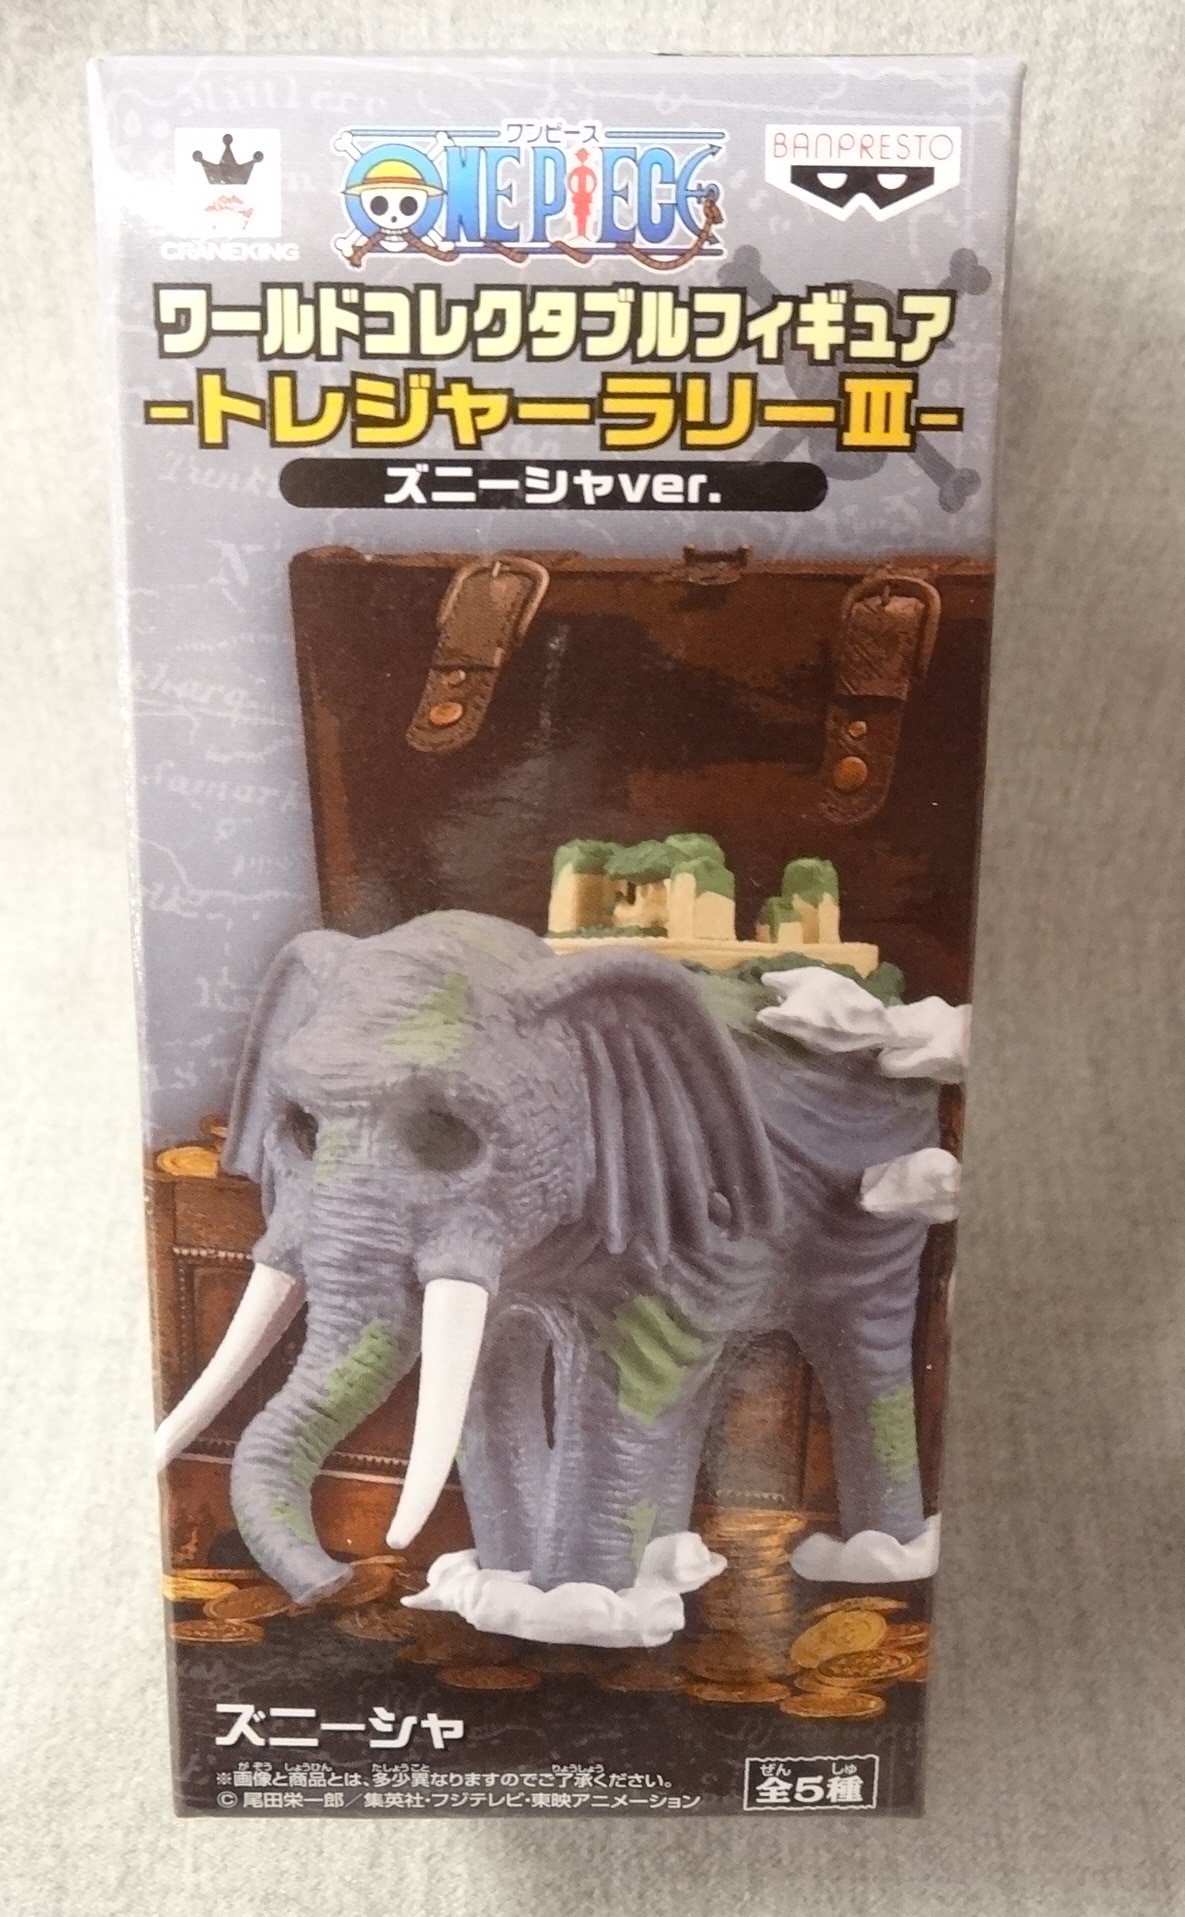 One Piece WCF World Collectable Figure ZOU Elephant Complete Set of 6 KN